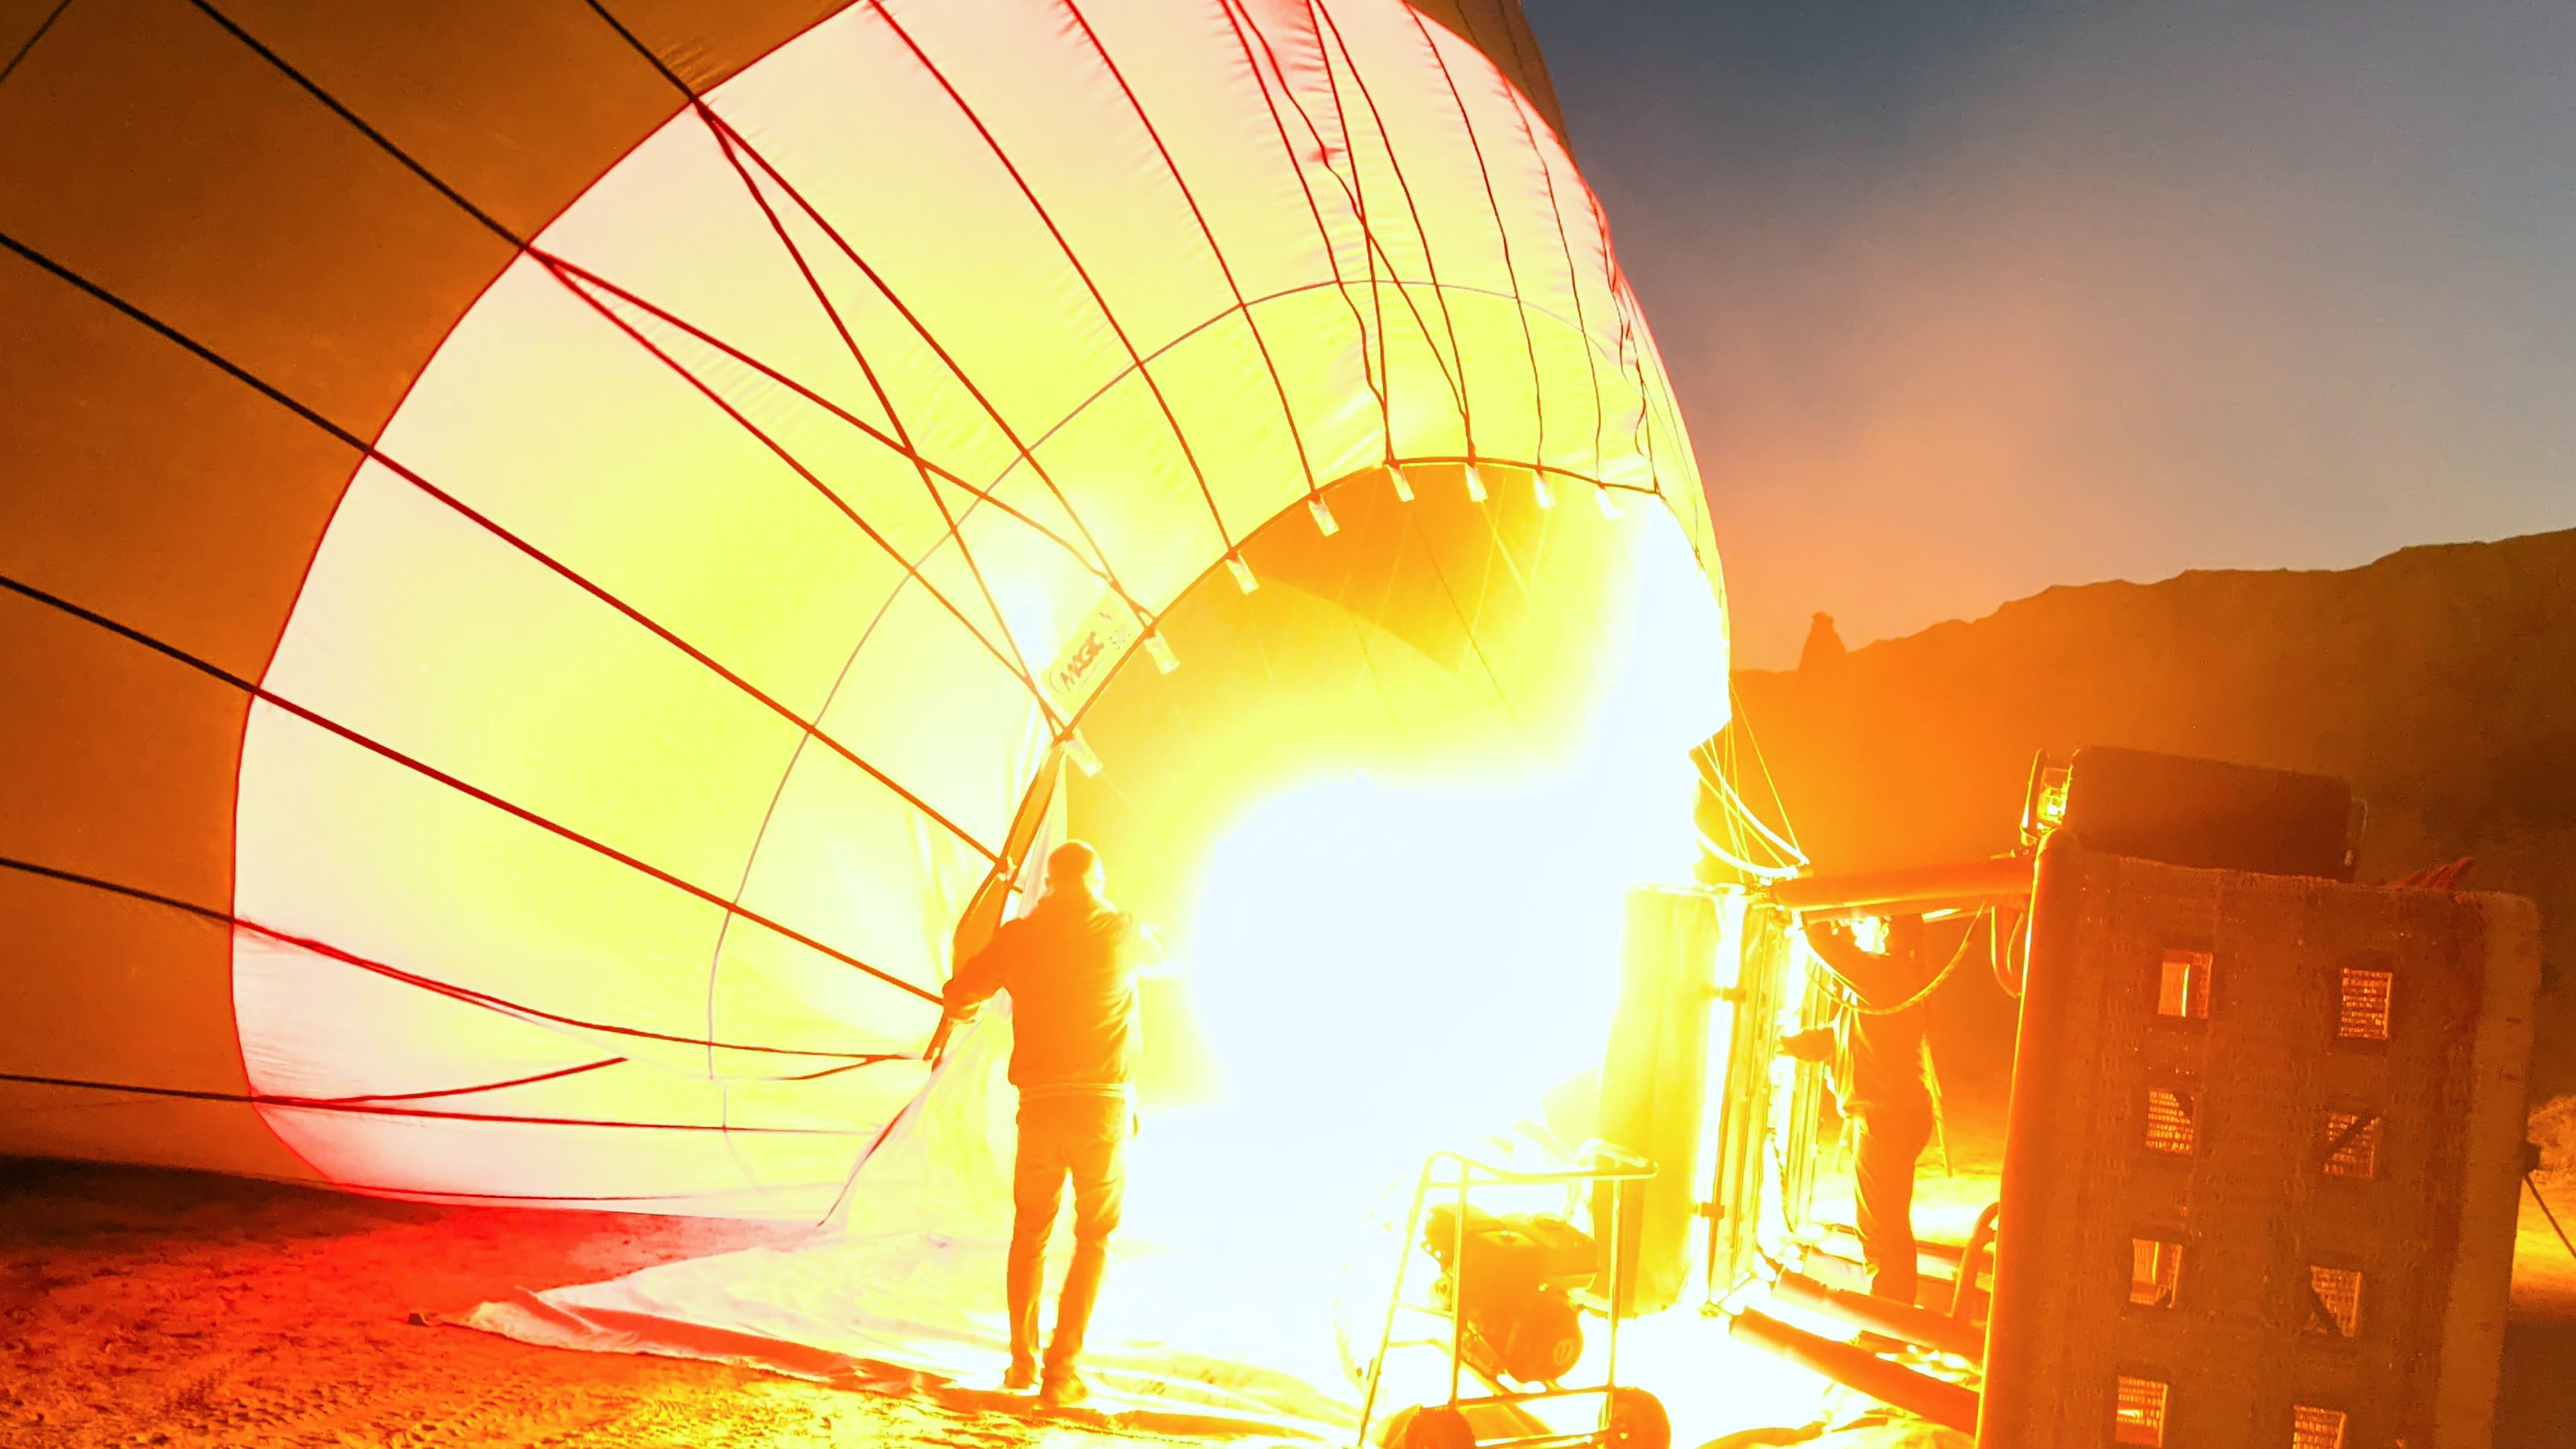 Silhouette of people by a hot air balloon being inflated, with a warm glow against a dusk sky.